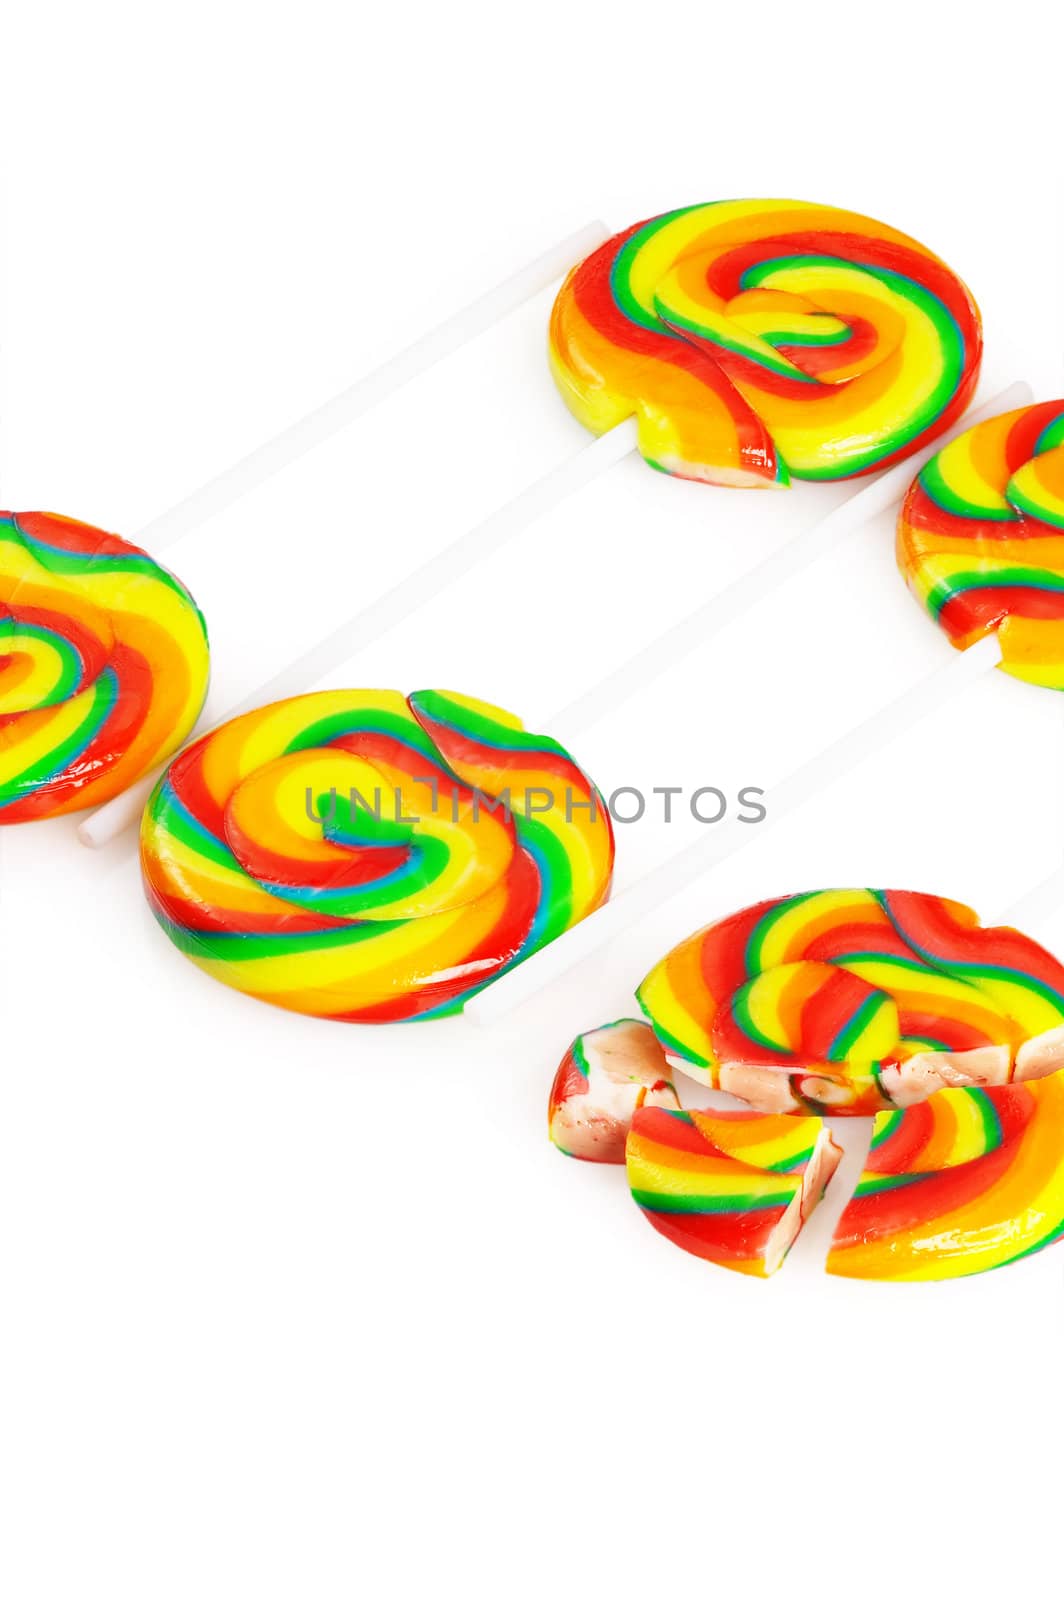 colorfull sugar lollipops isolated on white background